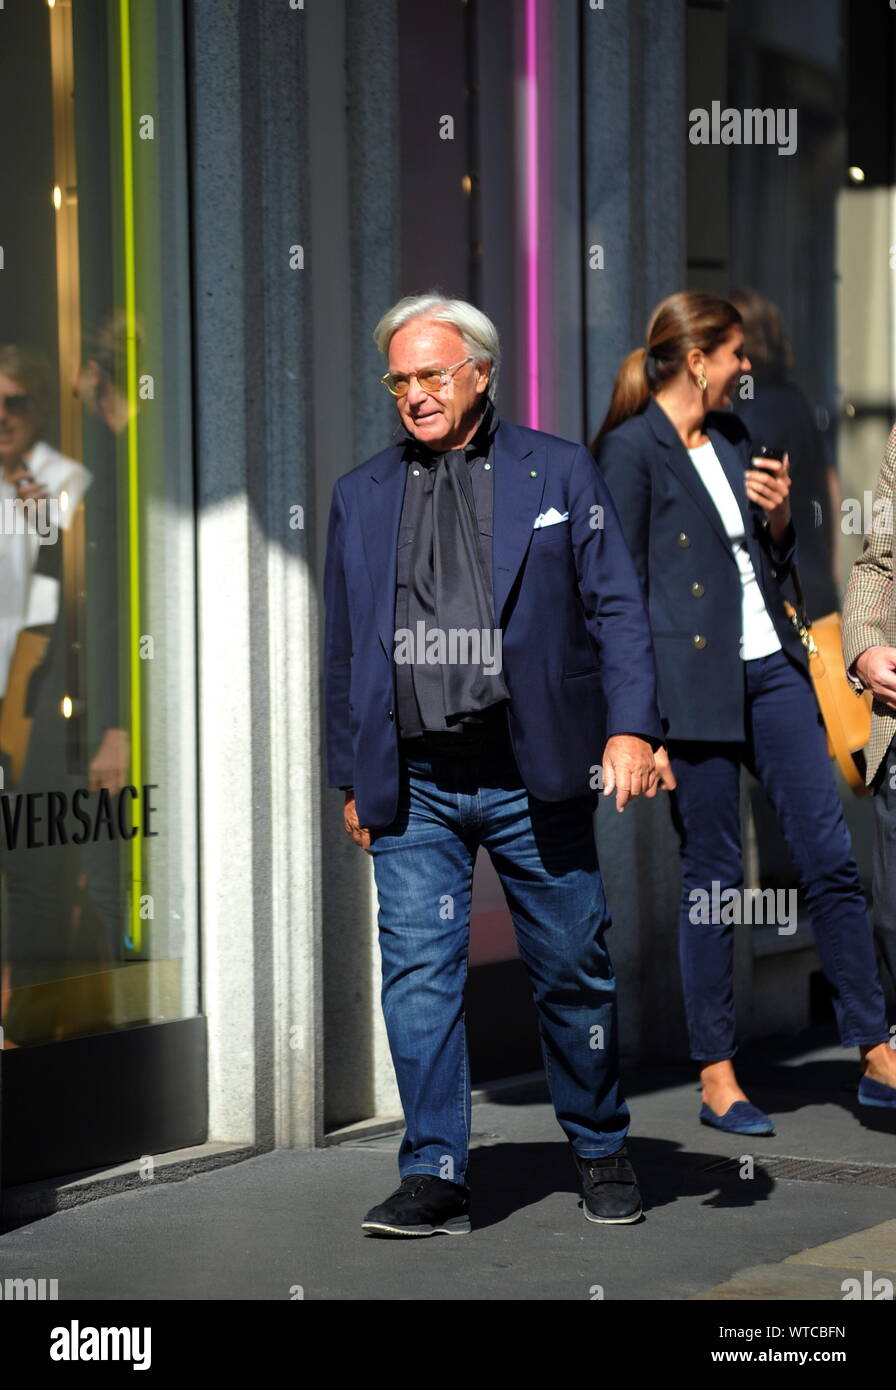 Milan, Diego Della Valle in the center The patron of Tod's, former  President of Fiorentina, DIEGO DELLA VALLE walks through the downtown  streets with friends, then after a stop at the Marchesi